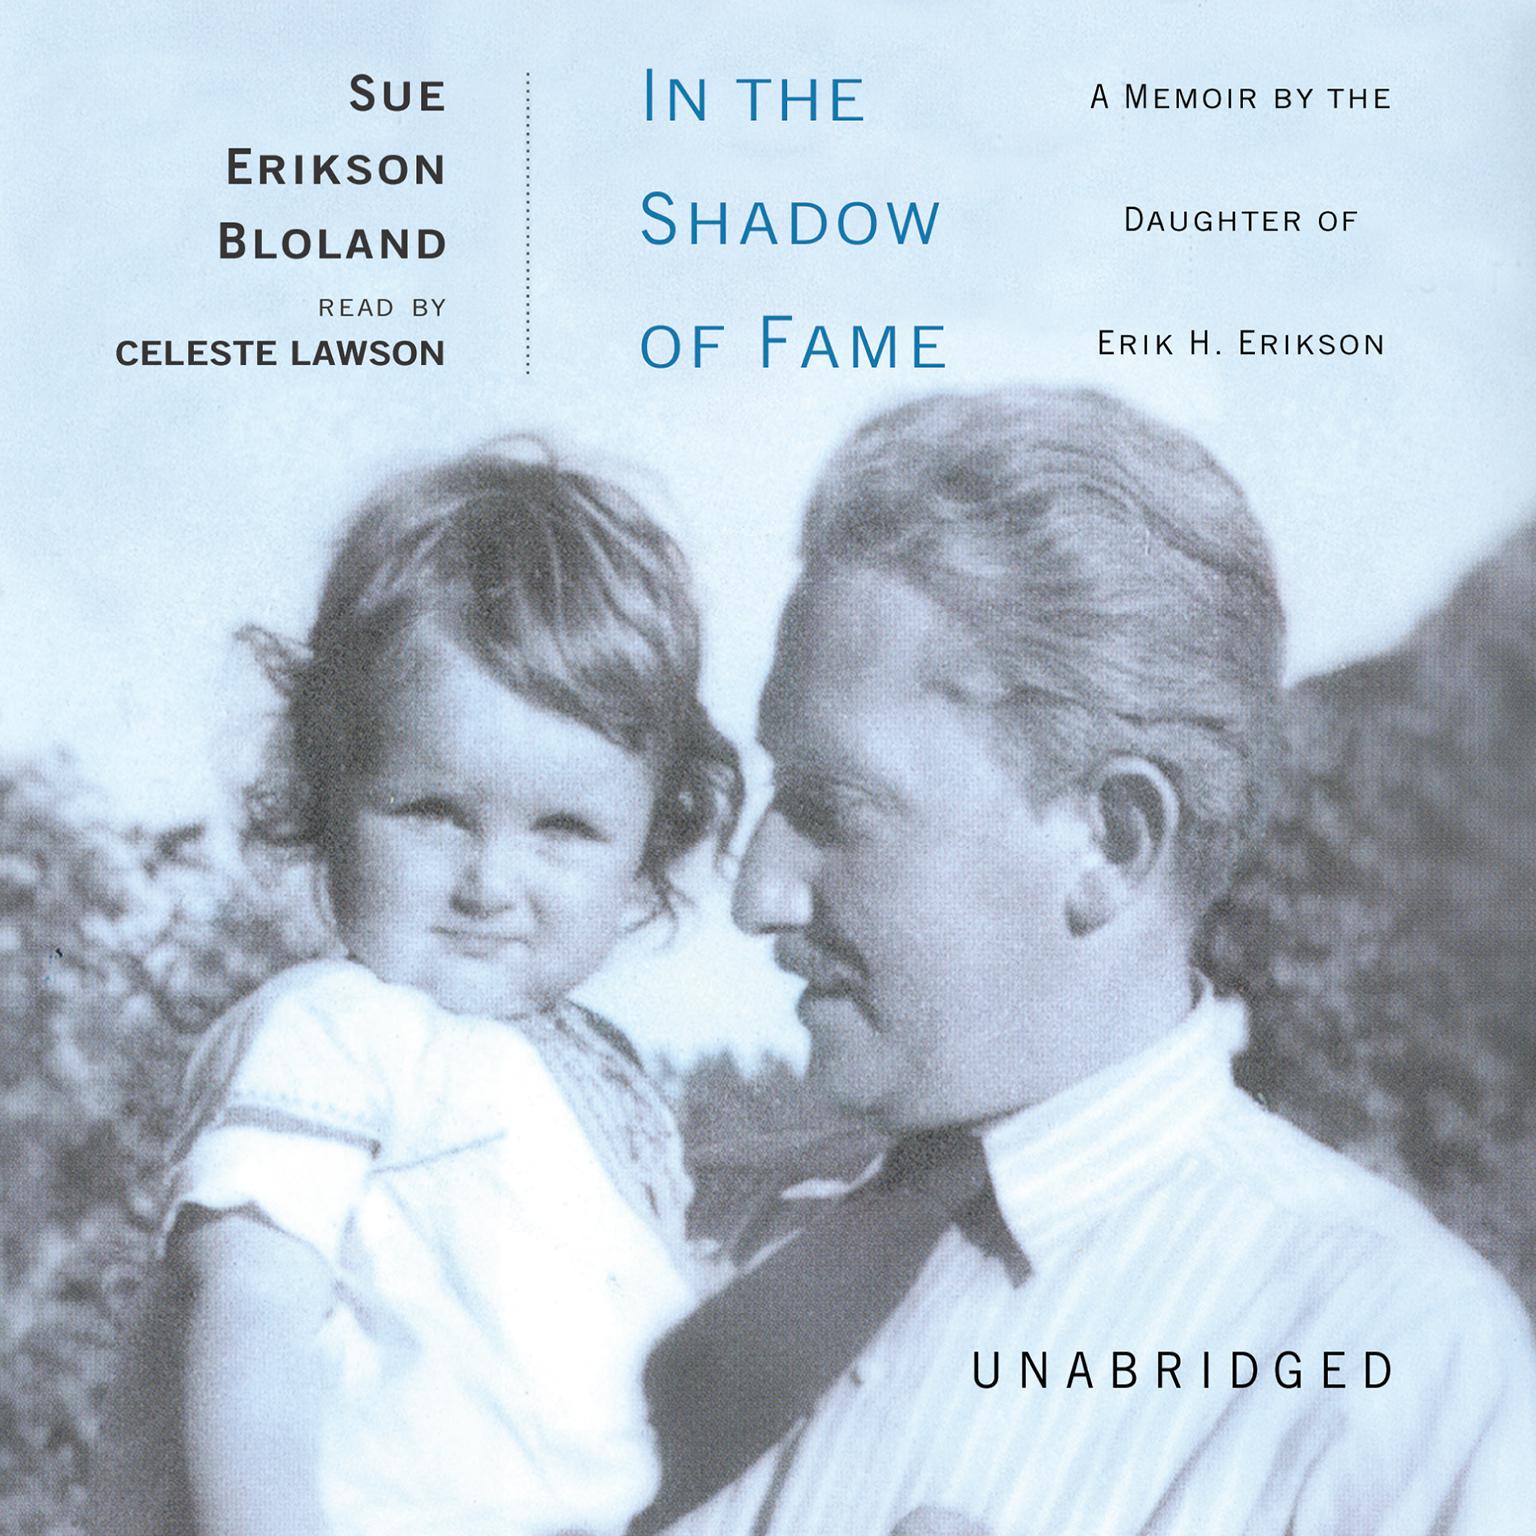 In the Shadow of Fame: A Memoir by the Daughter of Erik H. Erikson Audiobook, by Sue Erikson Bloland